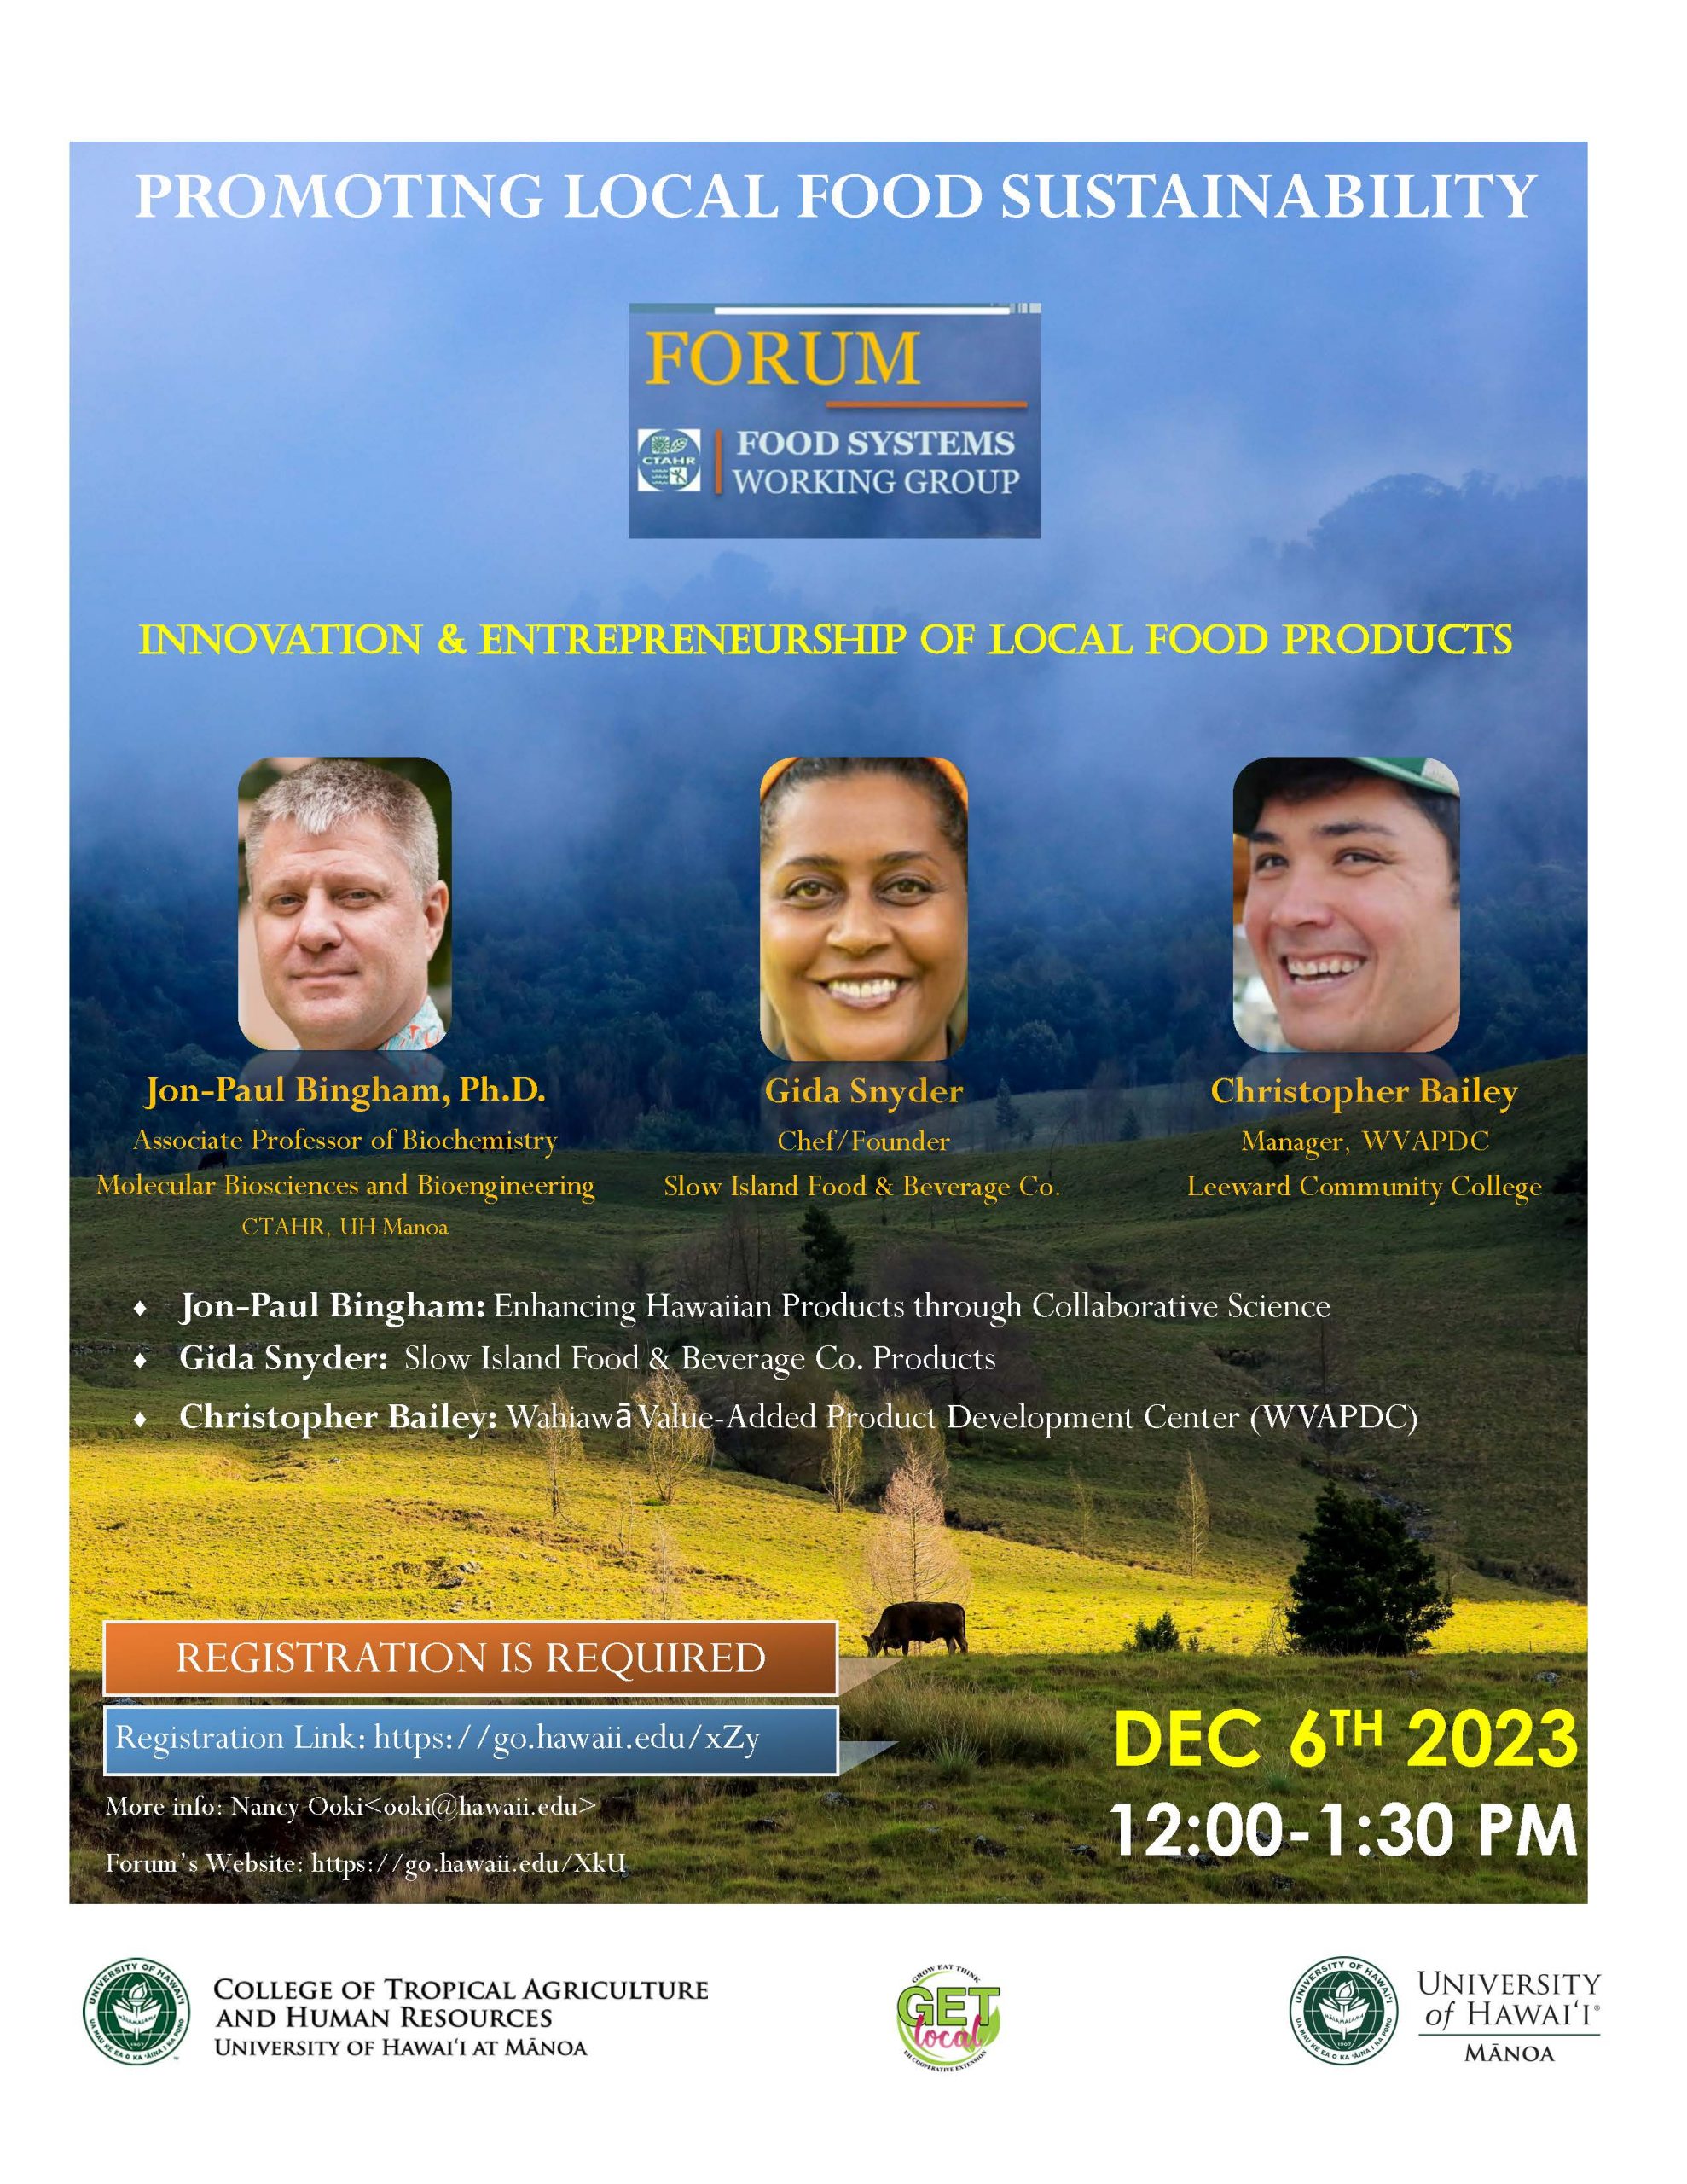 GET Local Forum 7 Flyer : Innovation & Entrepreneurship of Local Food Products